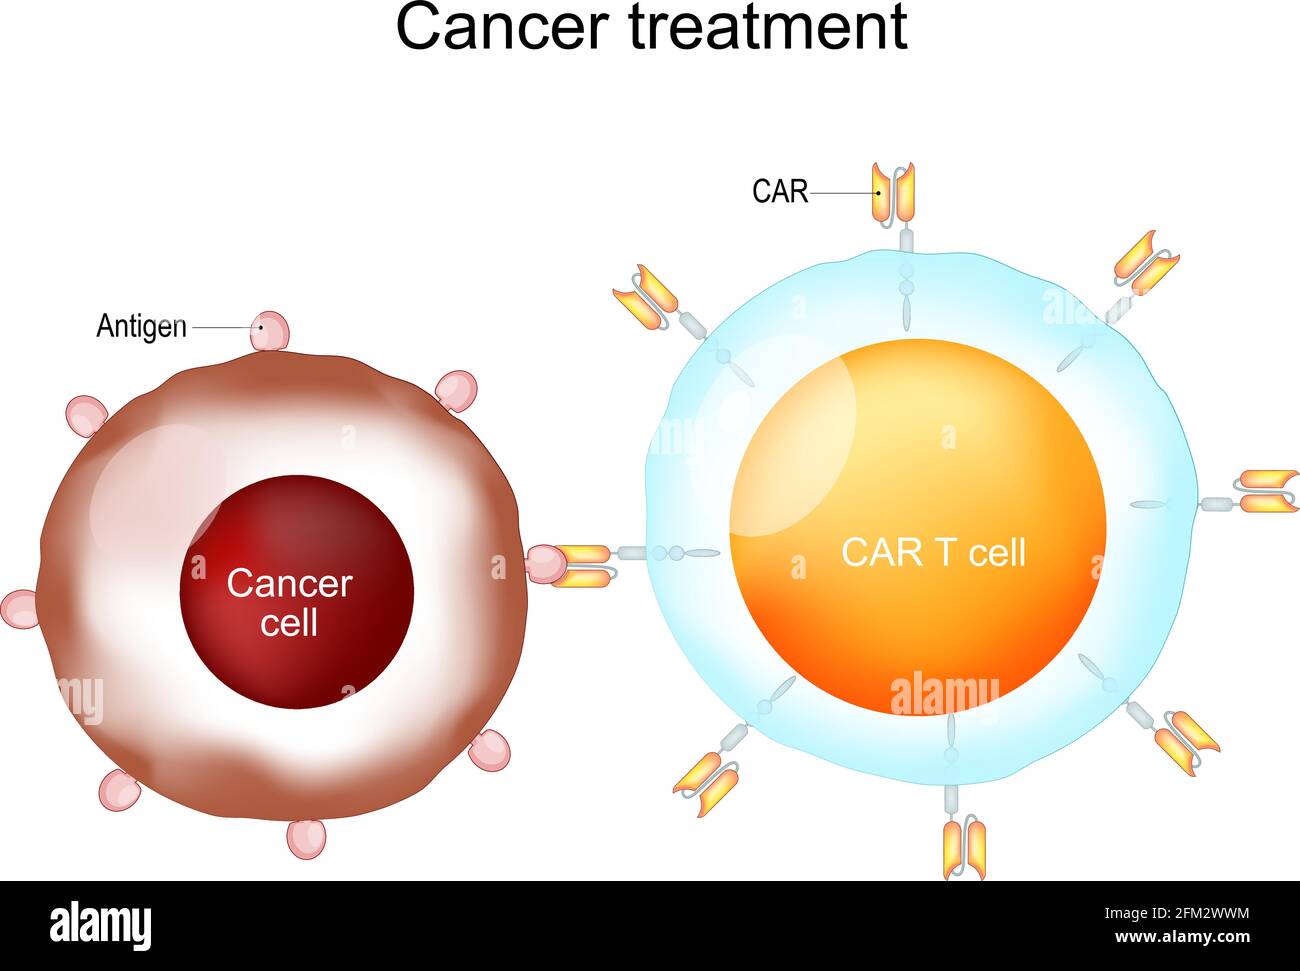 Cancer treatment and CAR T-cell therapy. Chimeric antigen receptor T cells. CAR T cells. Vector Stock Vector